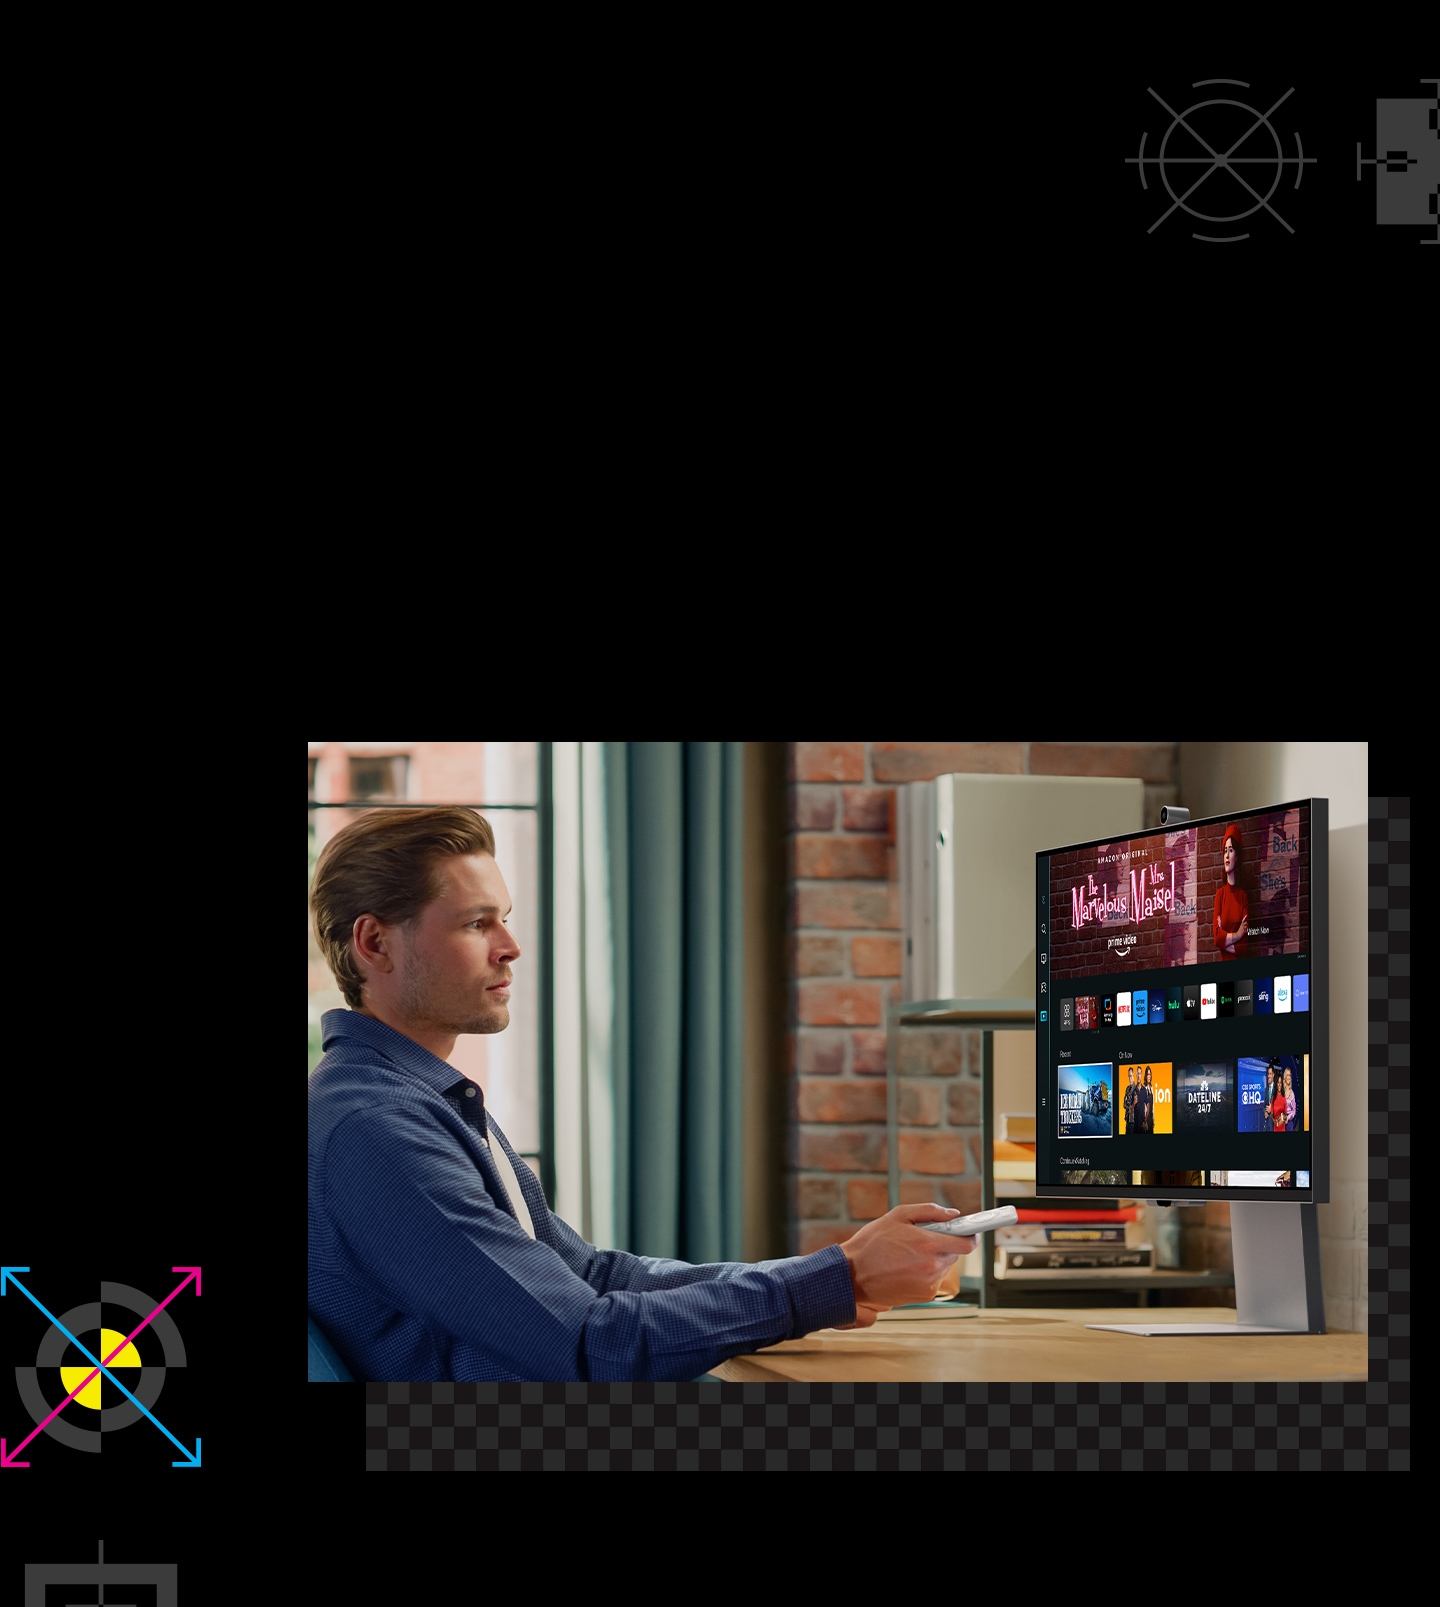 There is a monitor with the media hub UI. In front of the monitor, there is a man holding a remote controller.